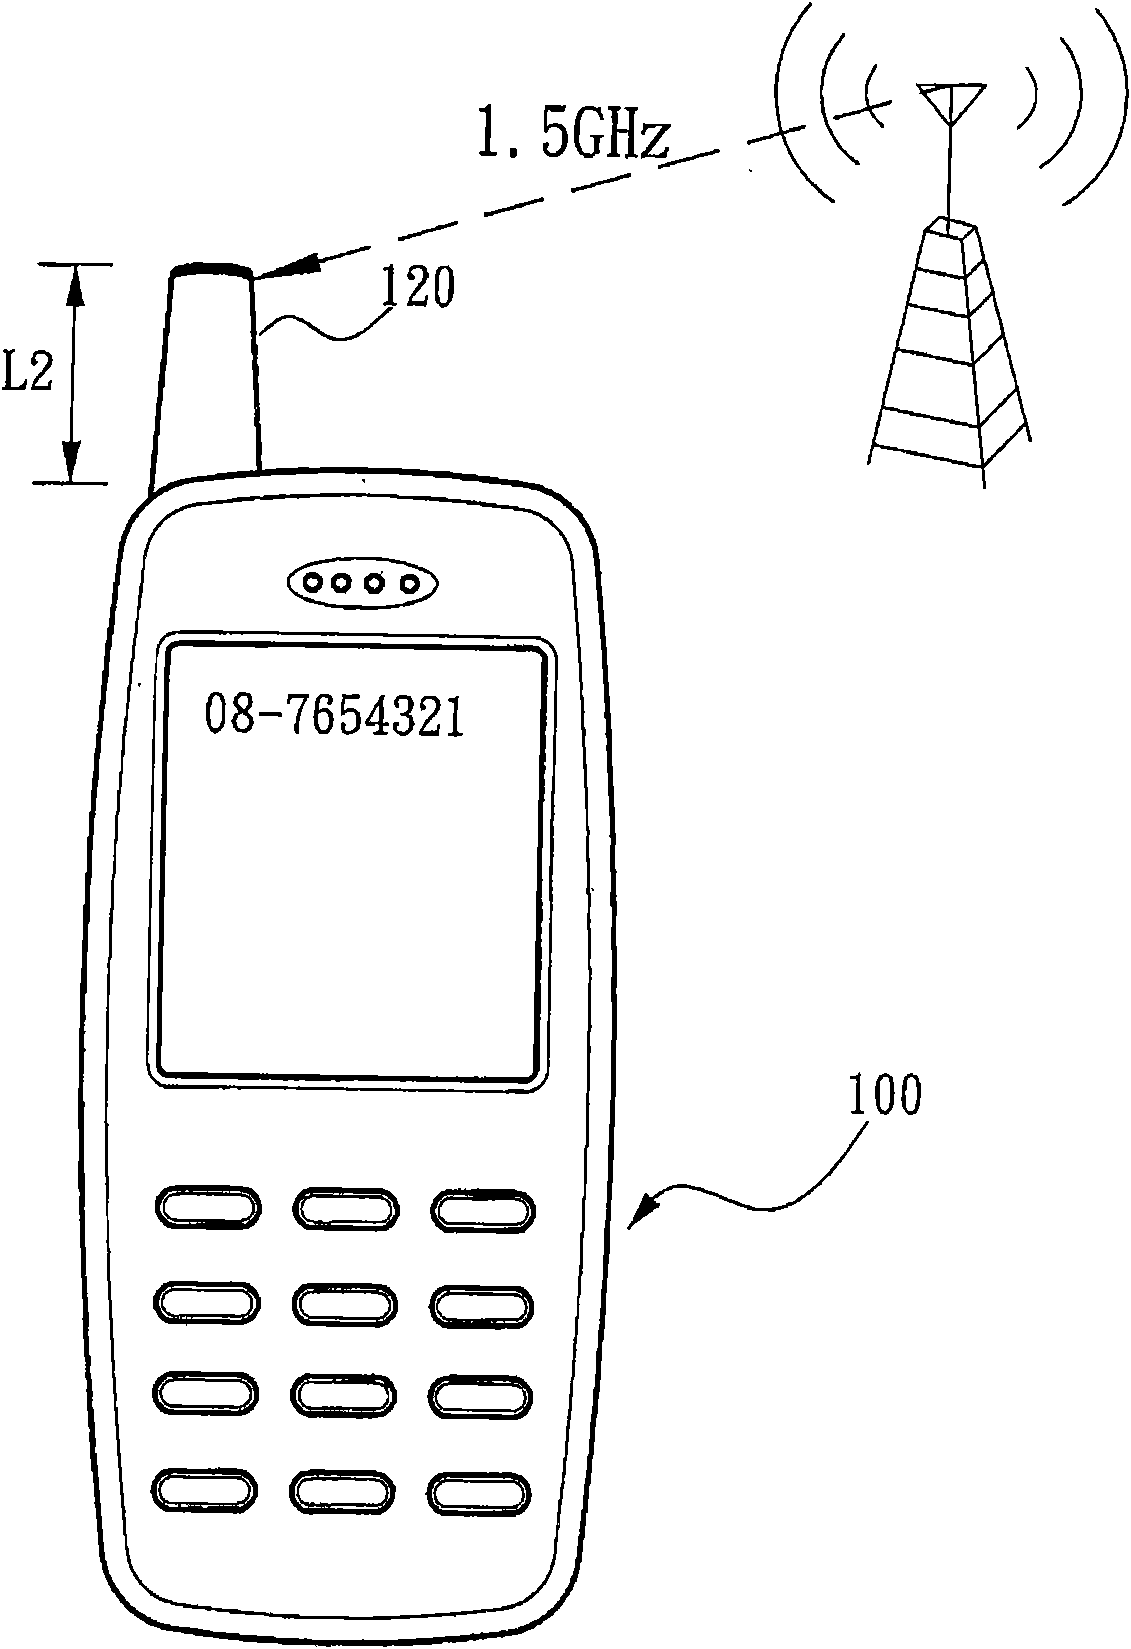 Handheld equipment capable of switching signal receiving modes